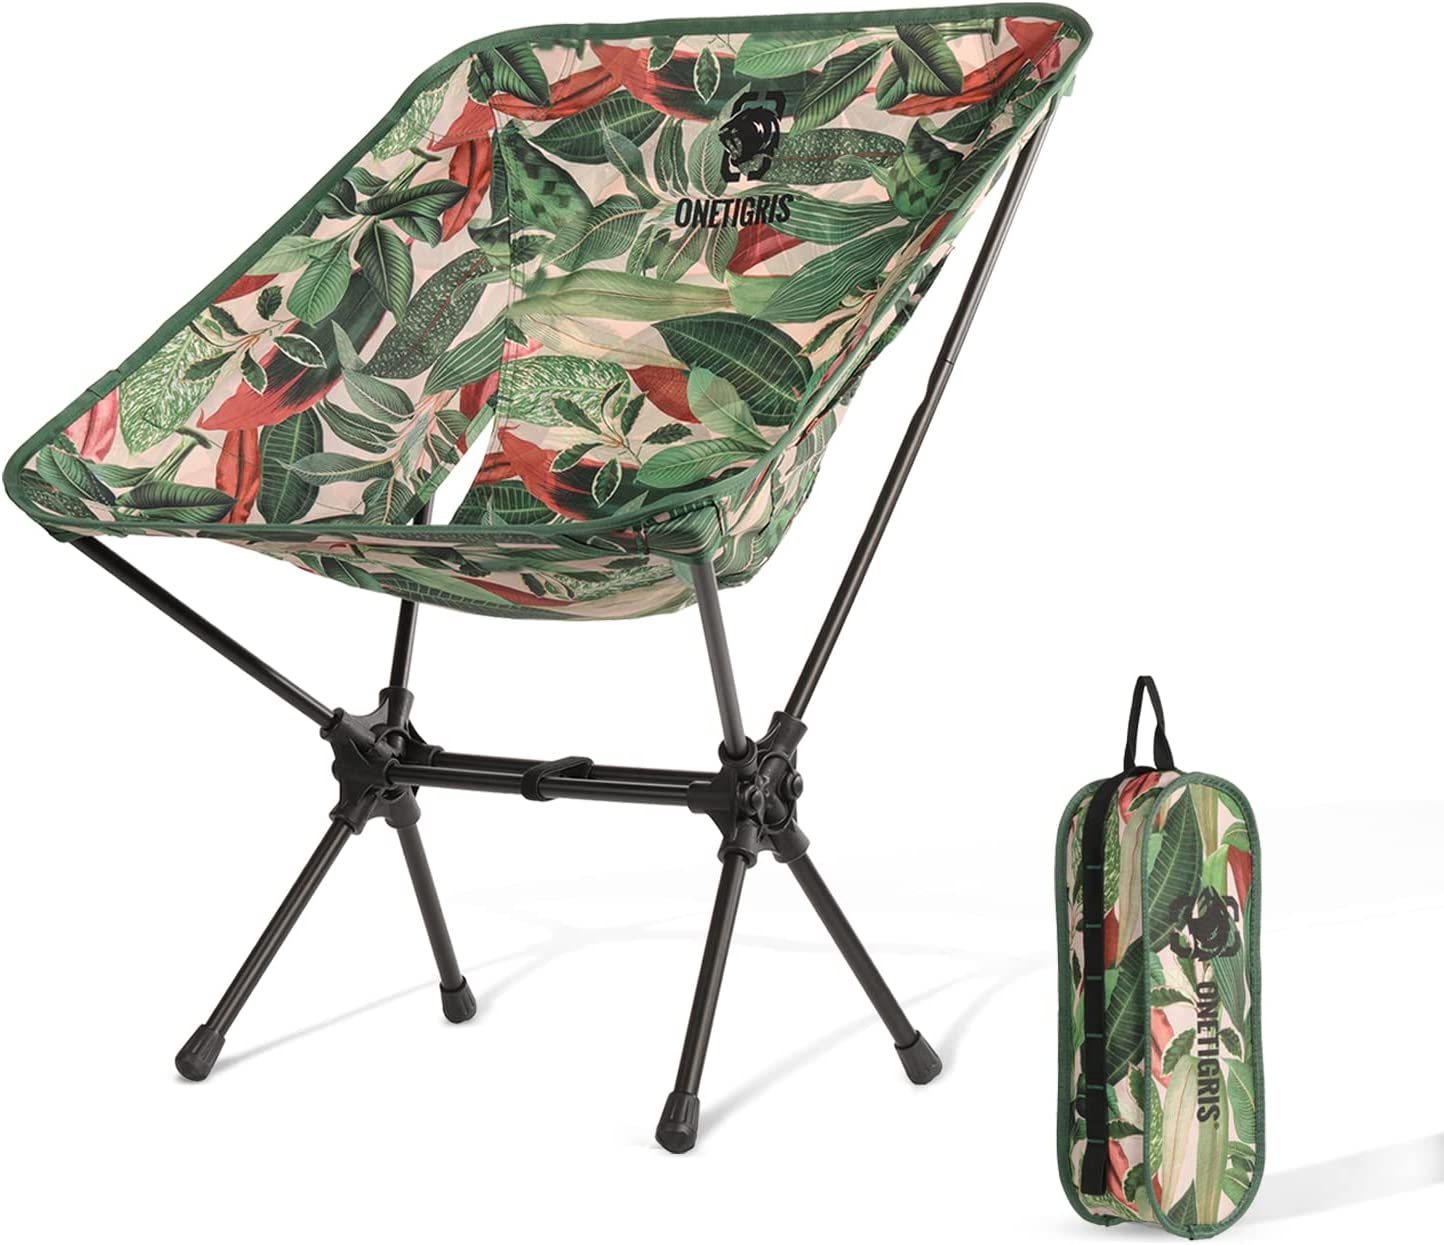 OneTigris camping chair